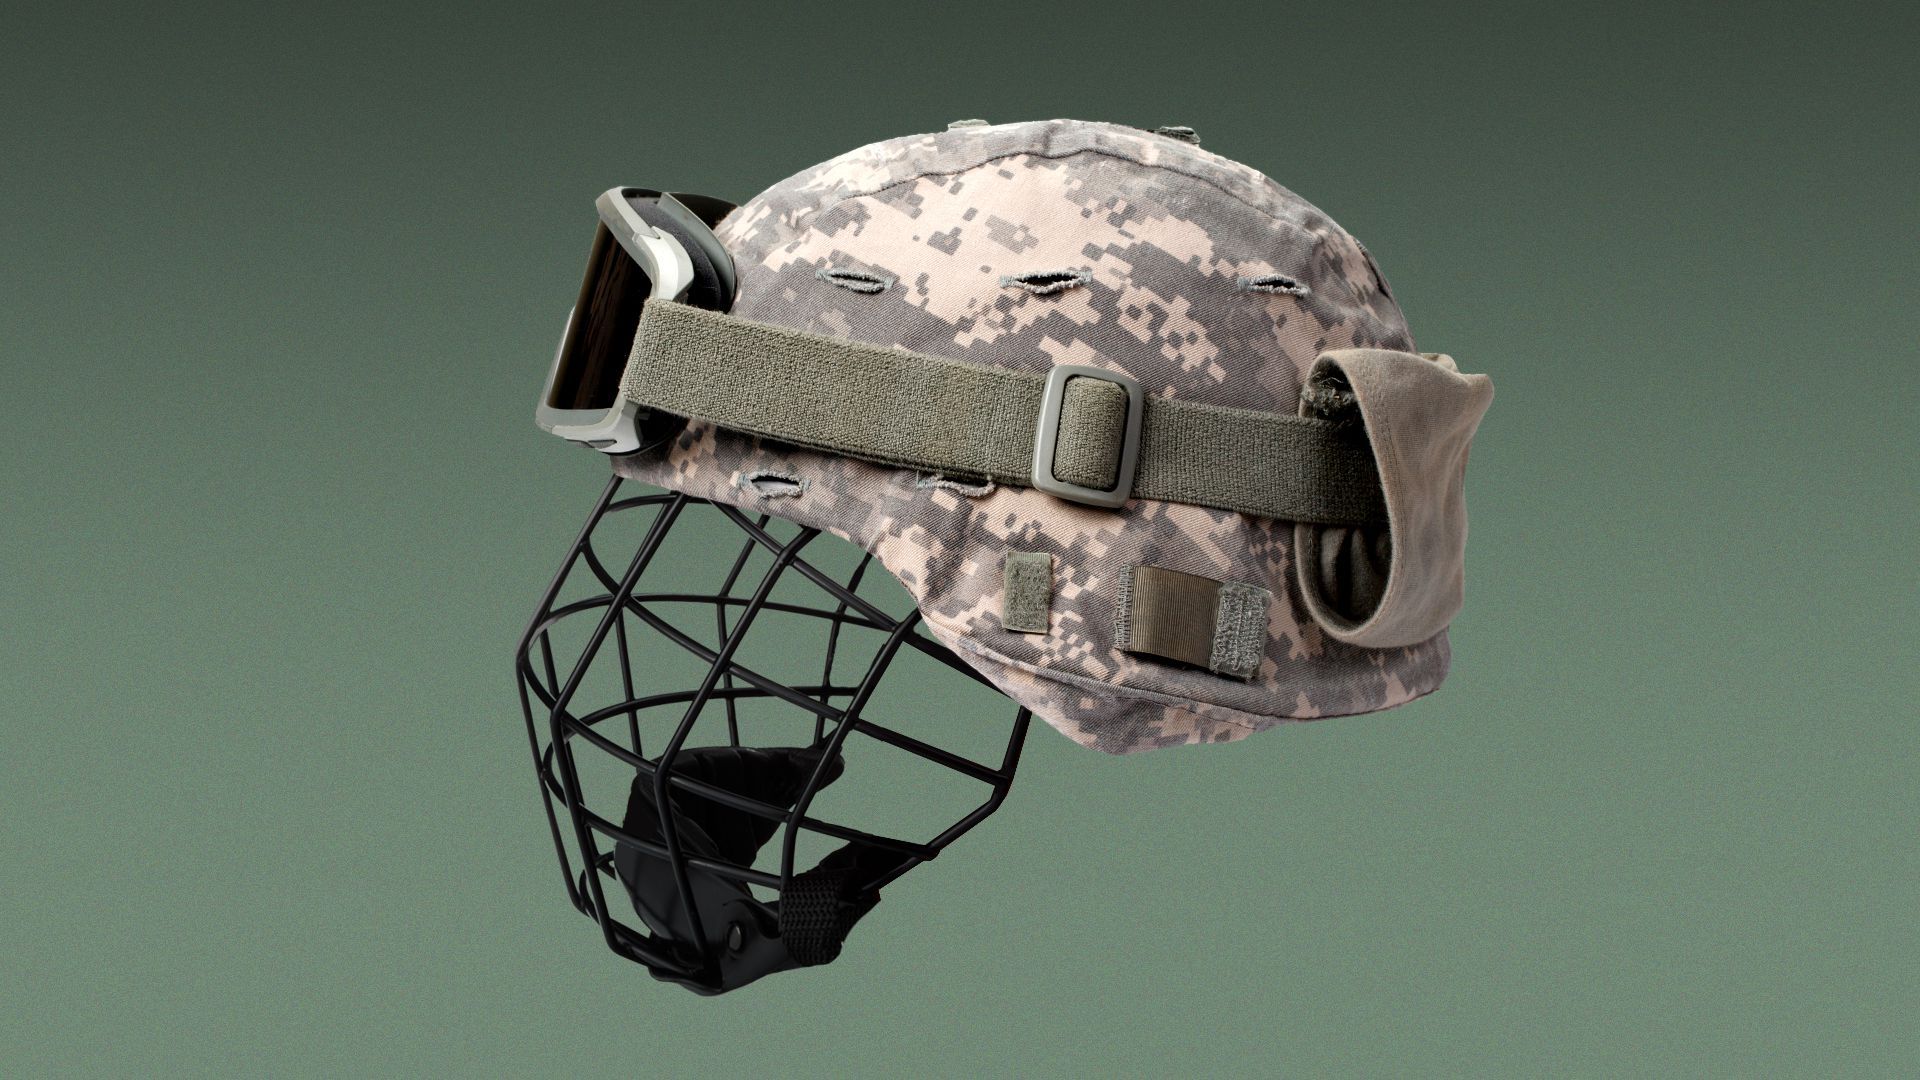 Illustration of a helmet made with a combination of a military helmet and a hockey helmet's face guard.